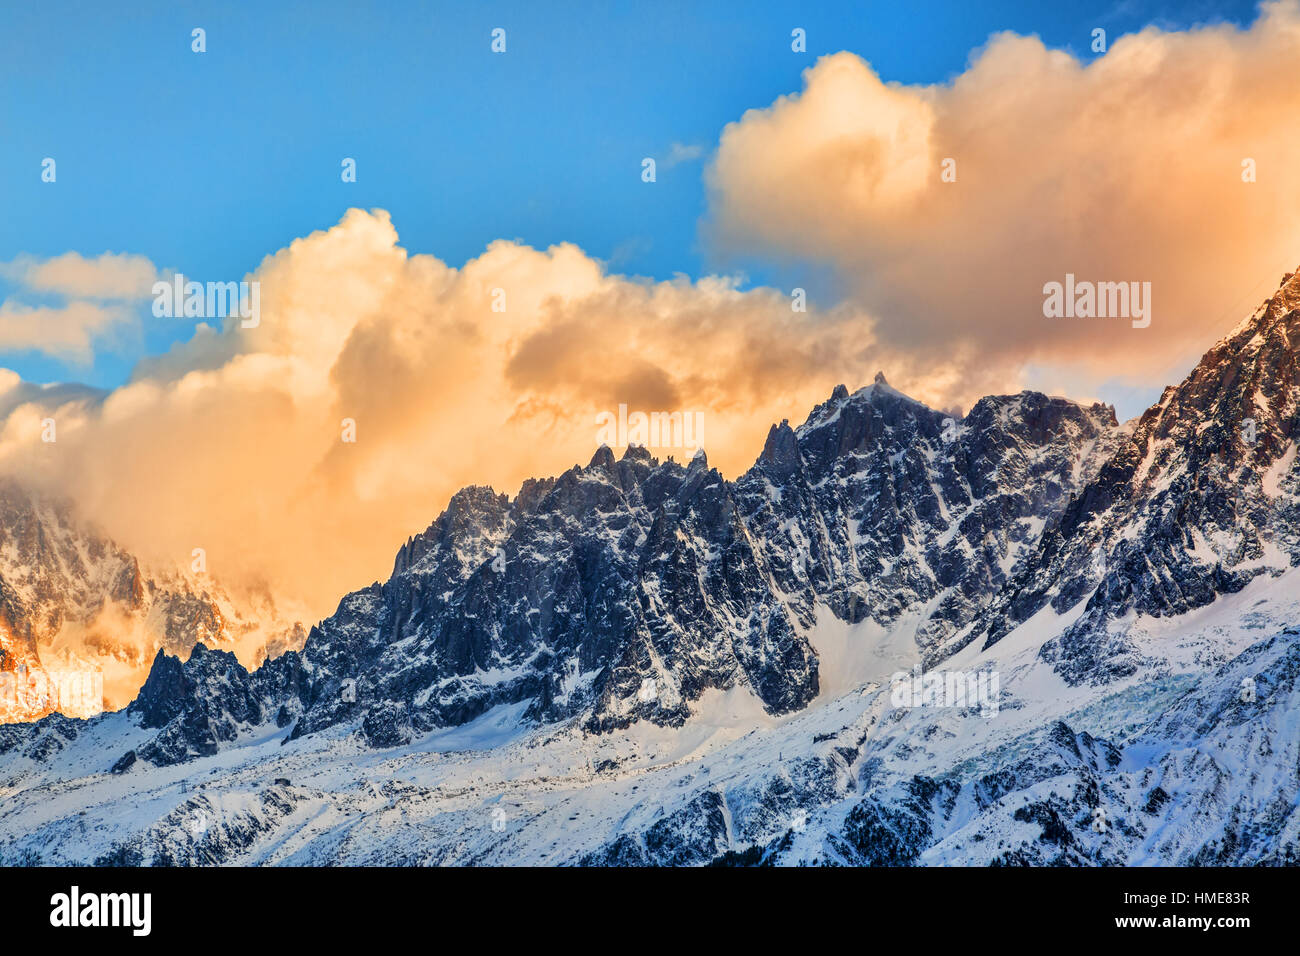 Winter image at dusk of  l'Aiguille du Plan located in Mont Blanc Massif. Stock Photo